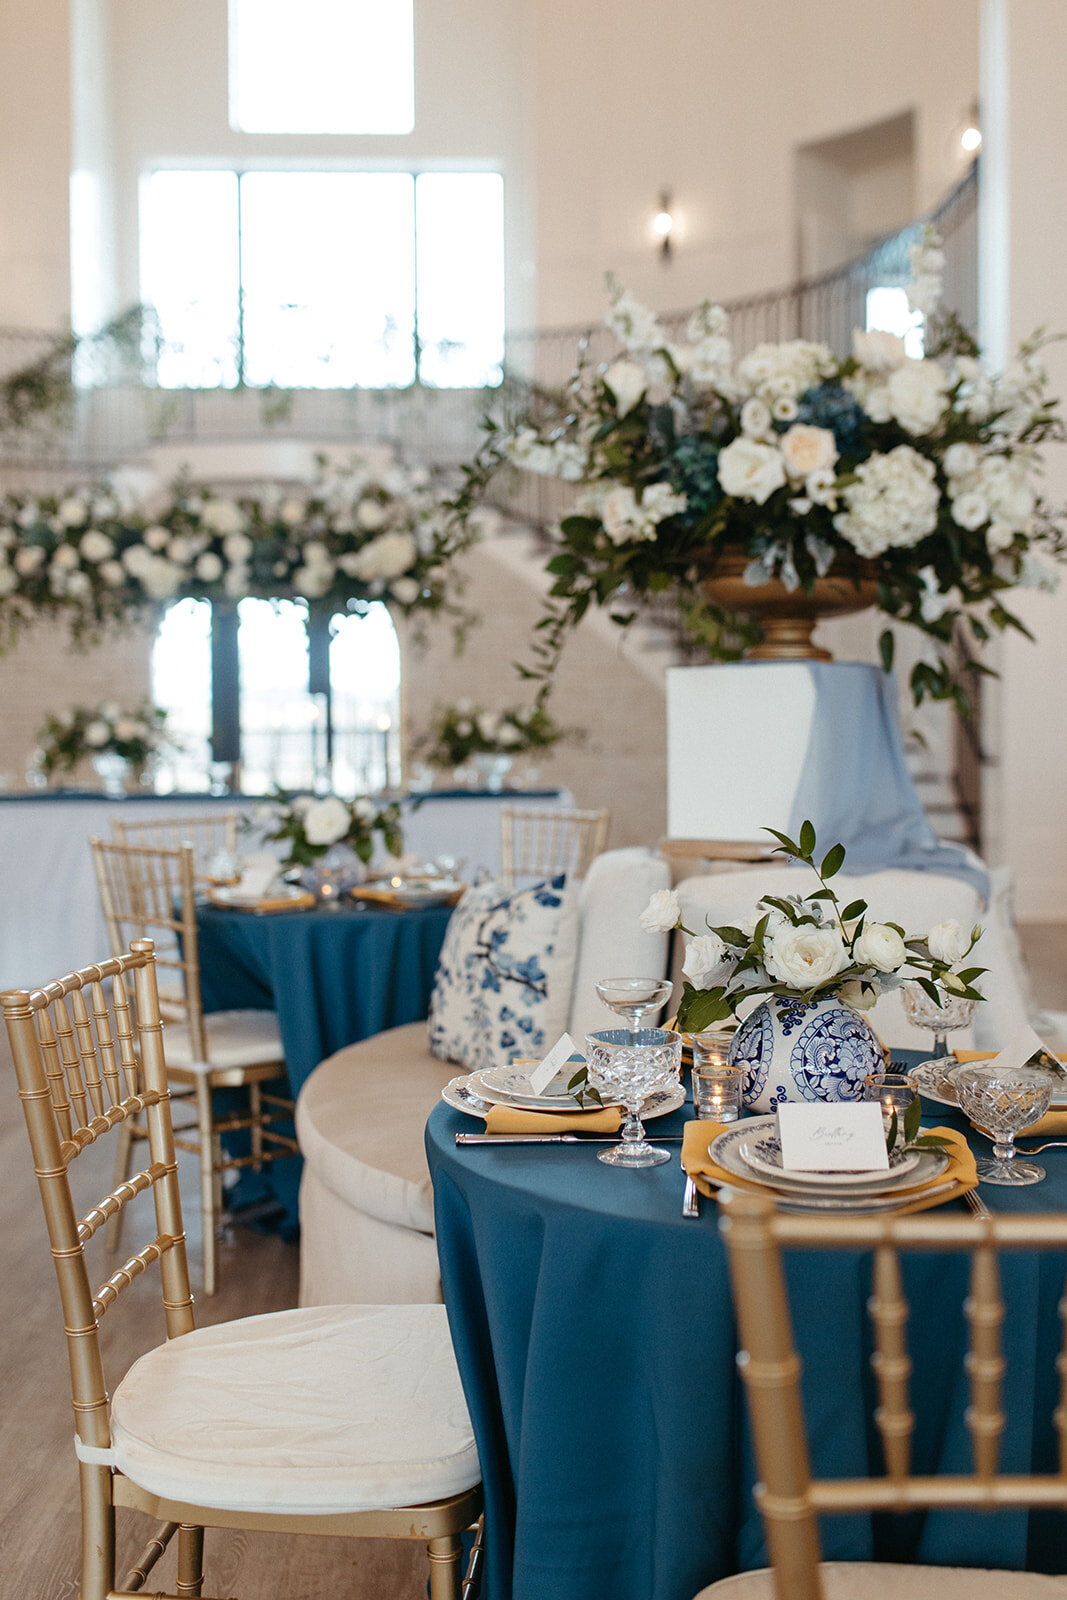 A bright and airy banquet room  with rounded tables in blue linen and gold chairs with white floral arrangements